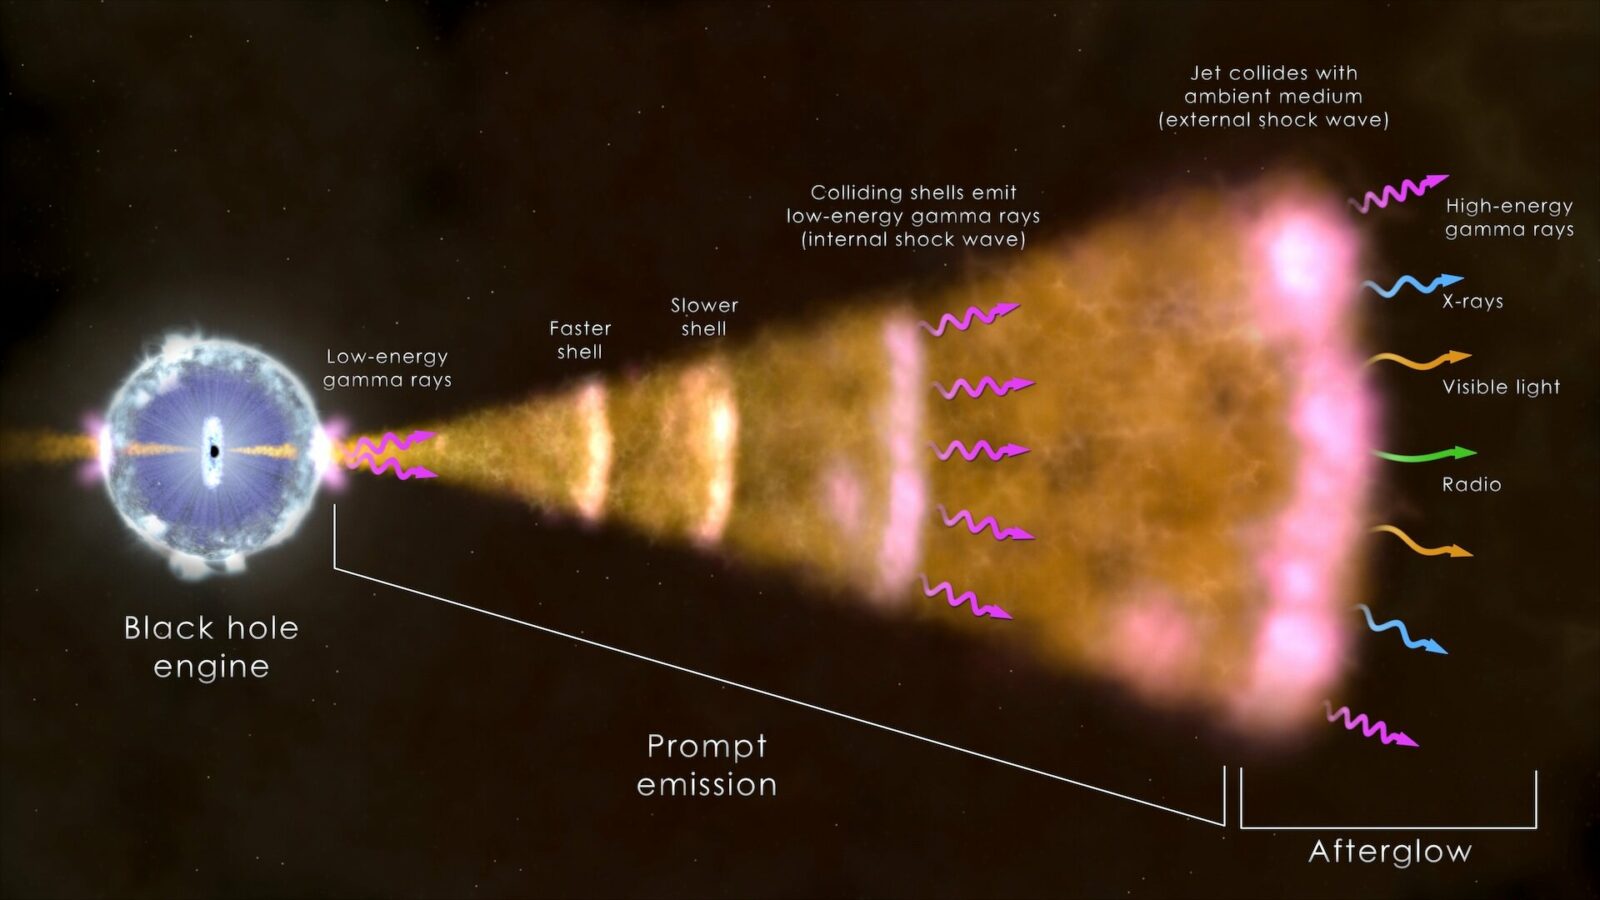 This illustration shows the ingredients of a long gamma-ray burst, the most common type. The core of a massive star (left) has collapsed, forming a black hole that sends a jet of particles moving through the collapsing star and out into space at nearly the speed of light. Radiation across the spectrum arises from hot ionized gas (plasma) in the vicinity of the newborn black hole, collisions among shells of fast-moving gas within the jet (internal shock waves), and from the leading edge of the jet as it sweeps up and interacts with its surroundings (external shock). Credit: NASA's Goddard Space Flight Center